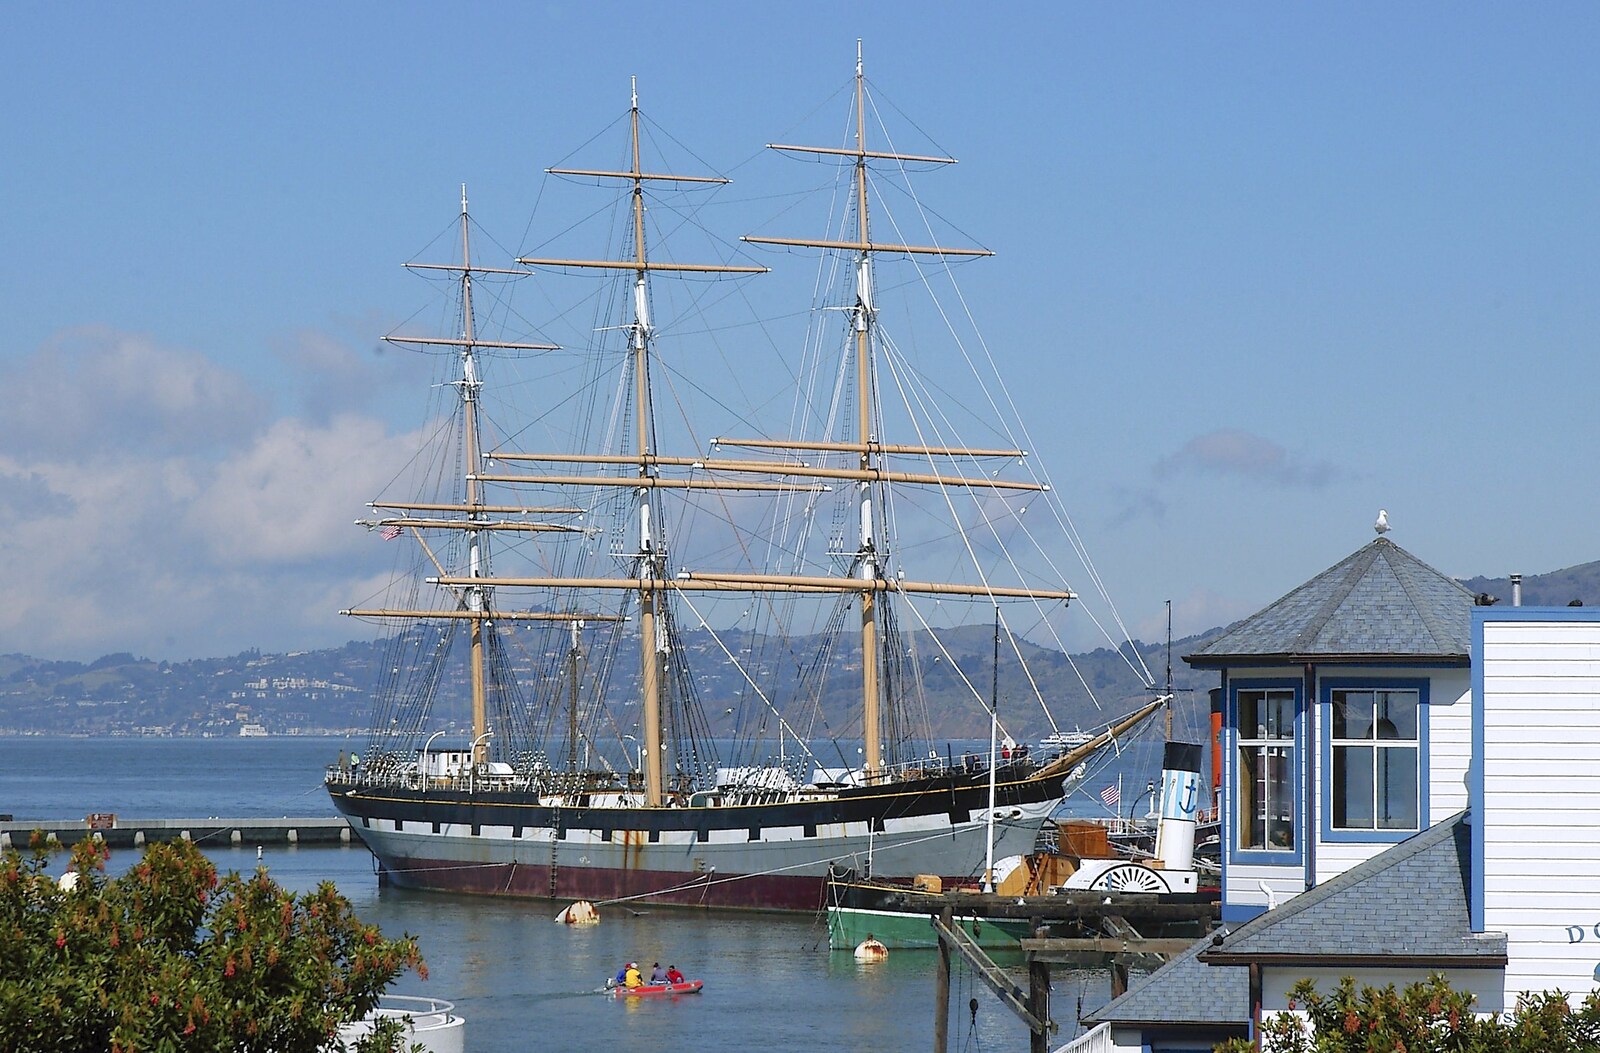 A tall ship on the Hyde Street Pier from Chinatown, Telegraph Hill and Fisherman's Wharf, San Francisco, California, US - 11th March 2006